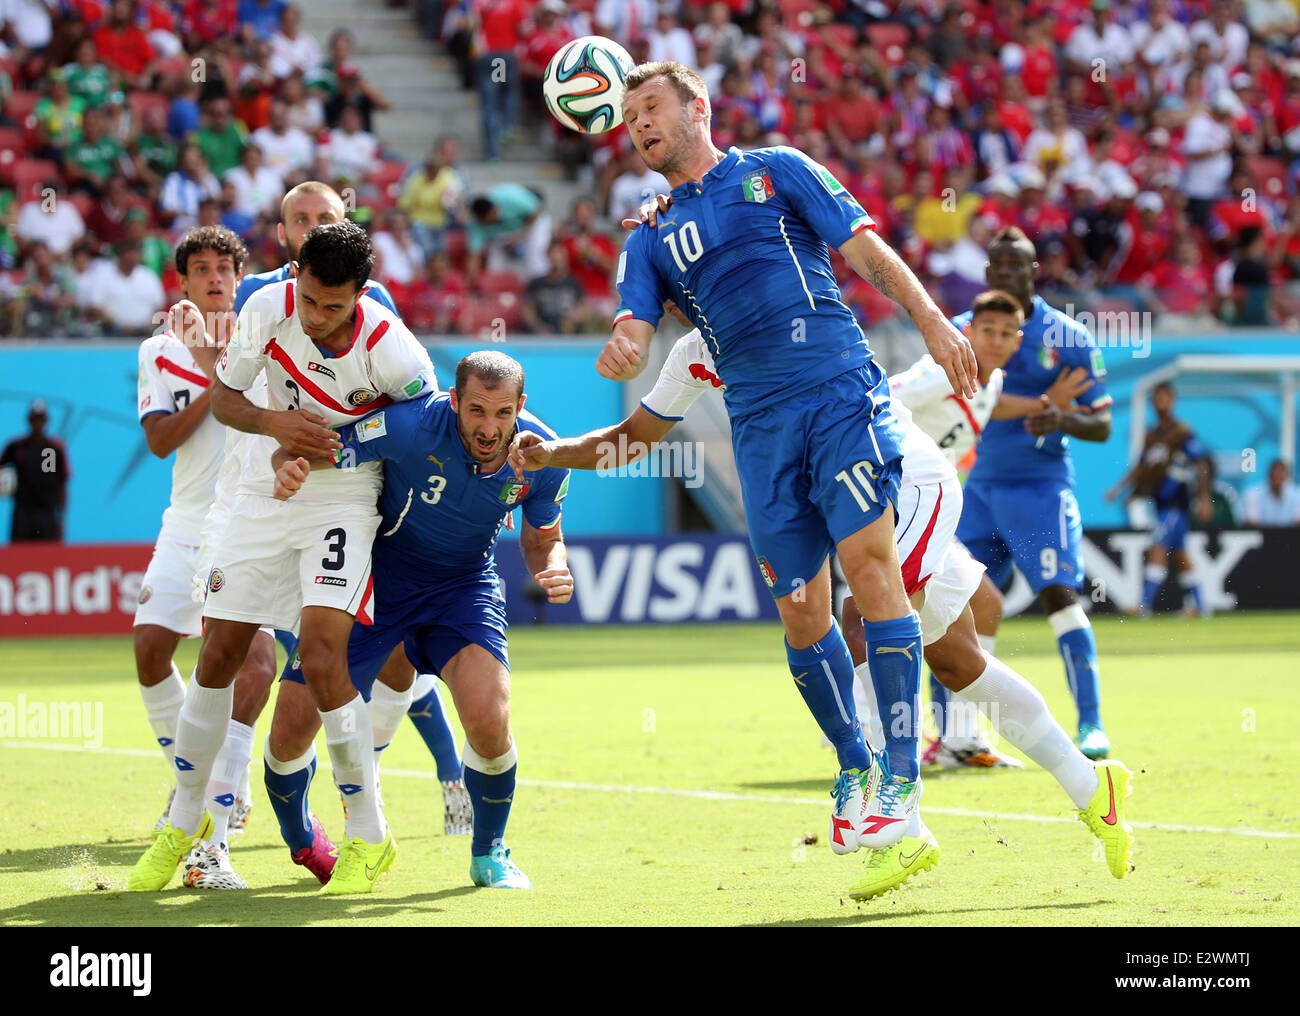 Recife, Brazil. 20th June, 2014. World Cup finals 2014. Group D match, Italy versus Costa Rica. Cassano wins the header against Costa Rica defenders Credit:  Action Plus Sports/Alamy Live News Stock Photo